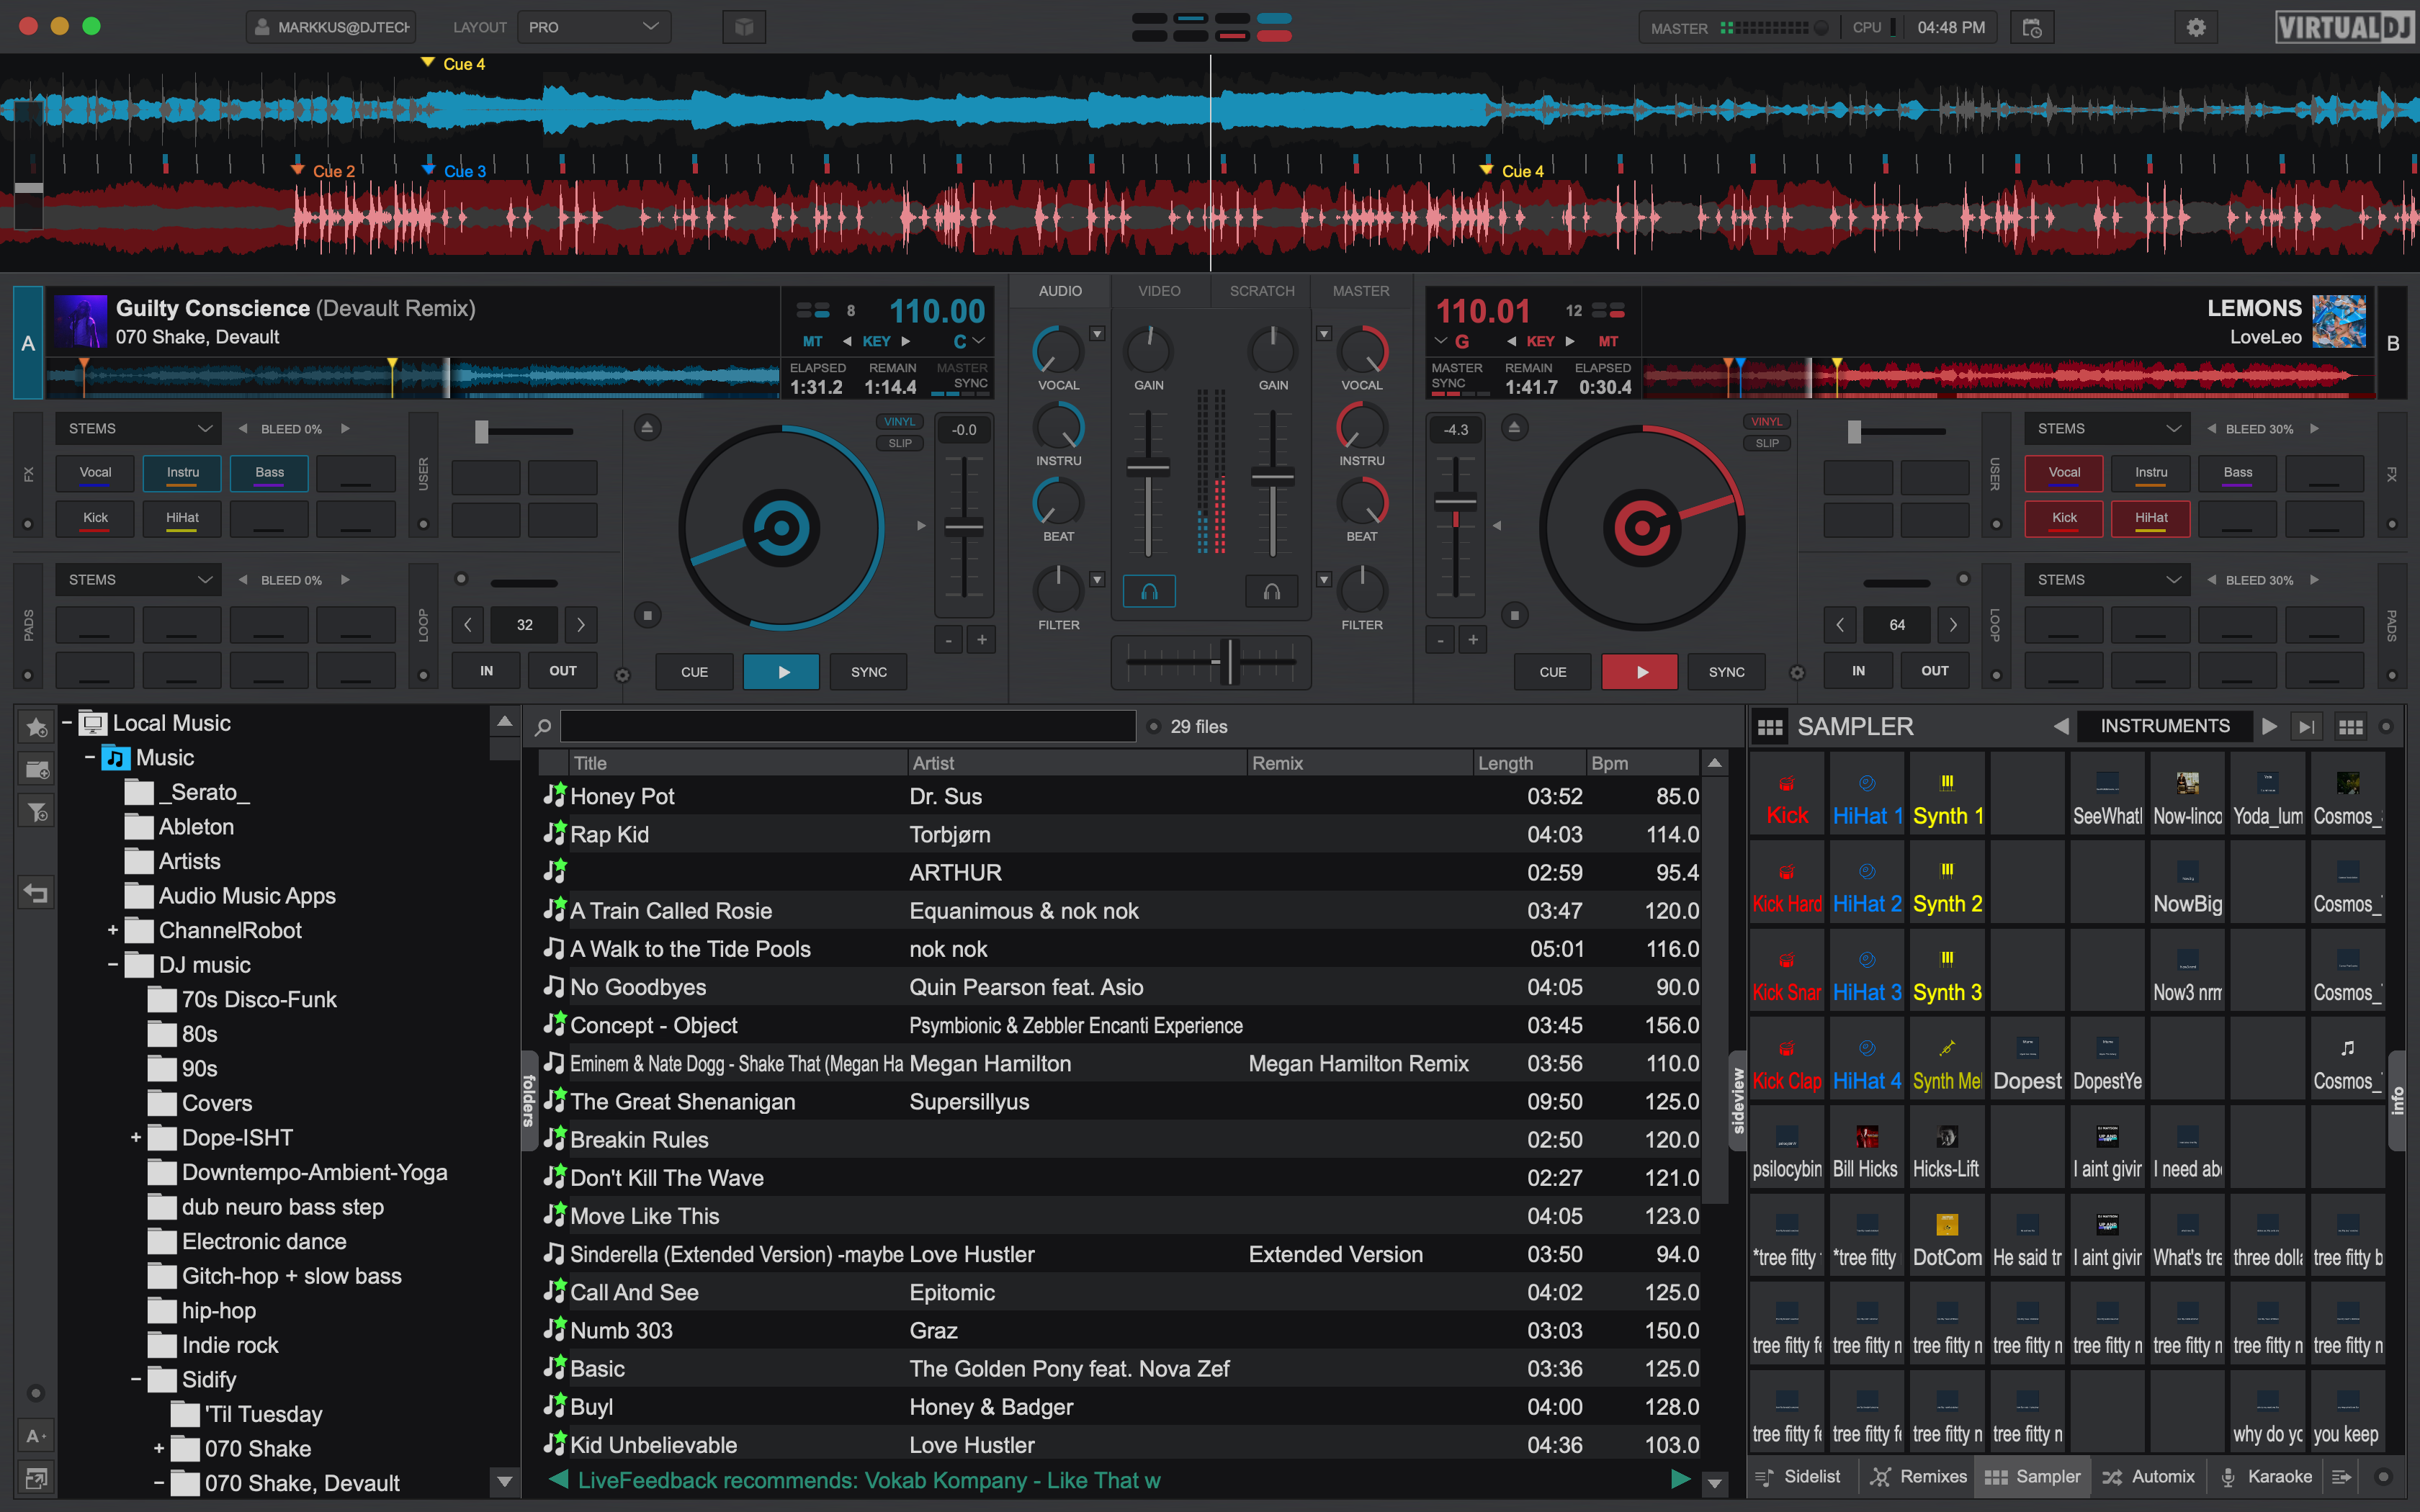 The VirtualDJ2021 default skin showing Stems assigned to the deck pads and the EZRemix mode assigned to the channel EQ knobs.